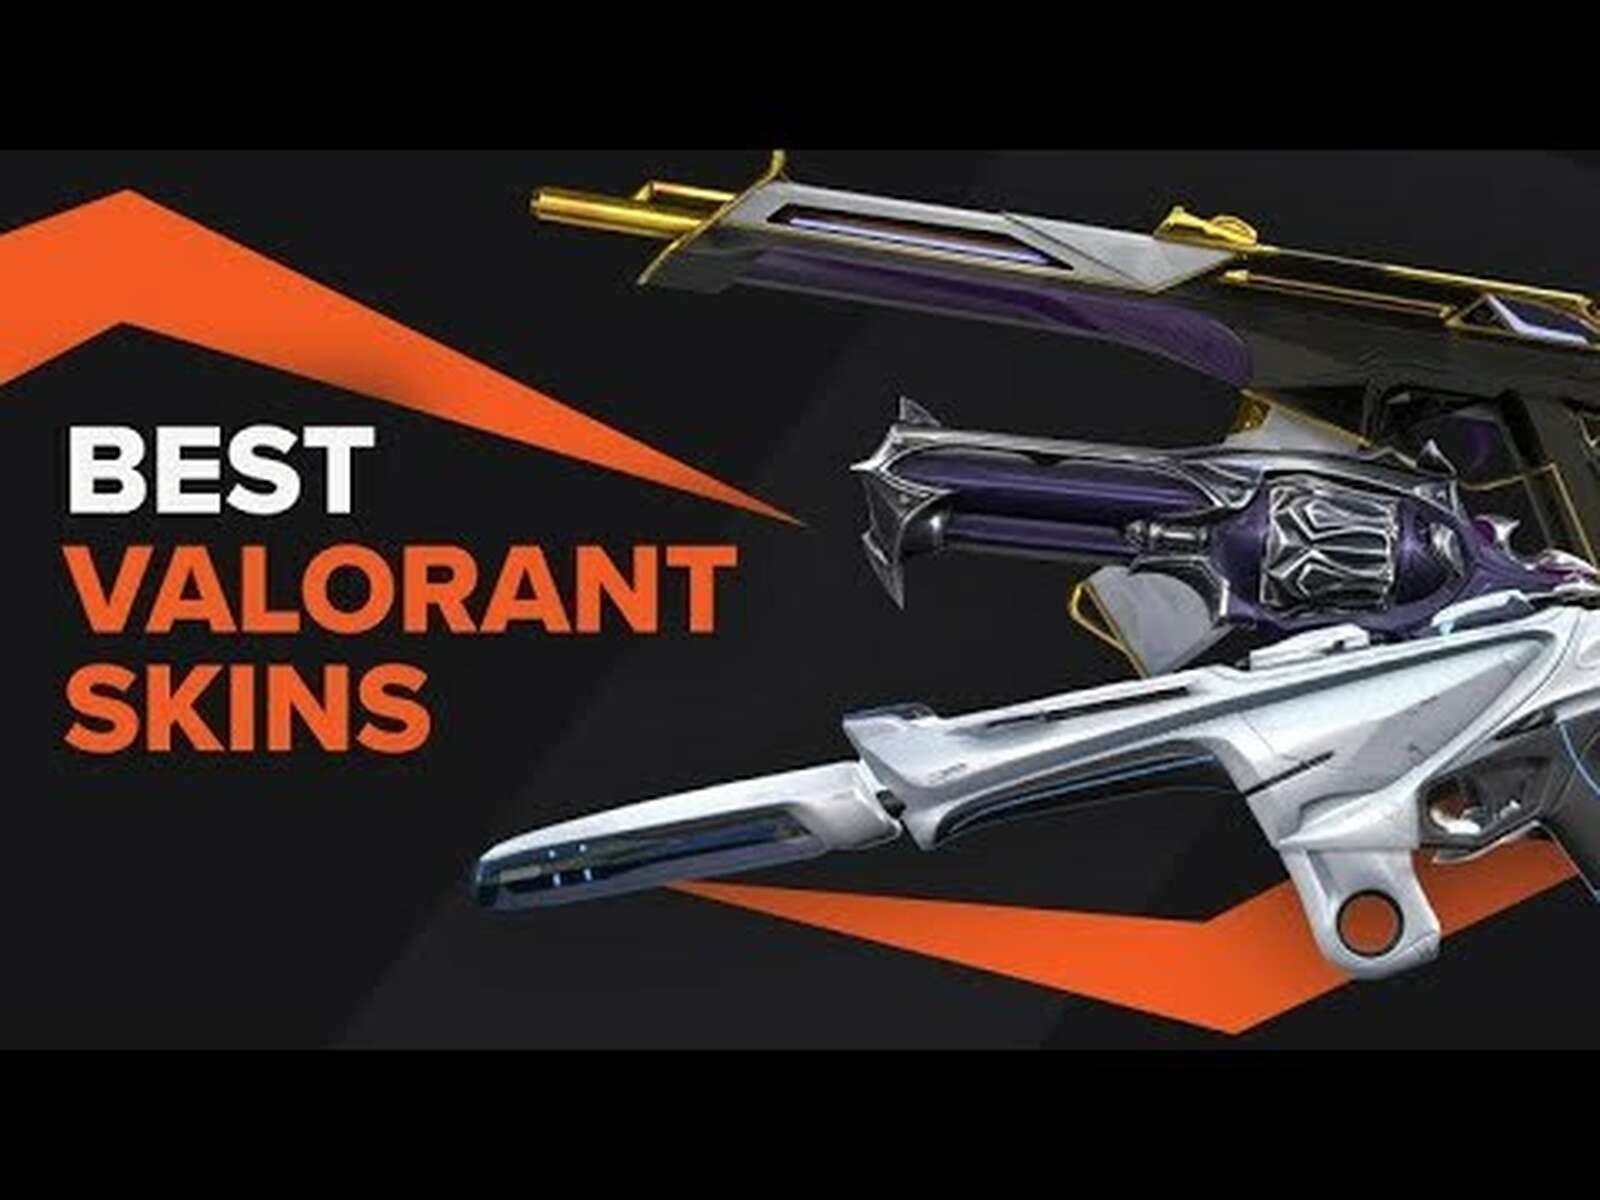 The Best Valorant Skins in 2023